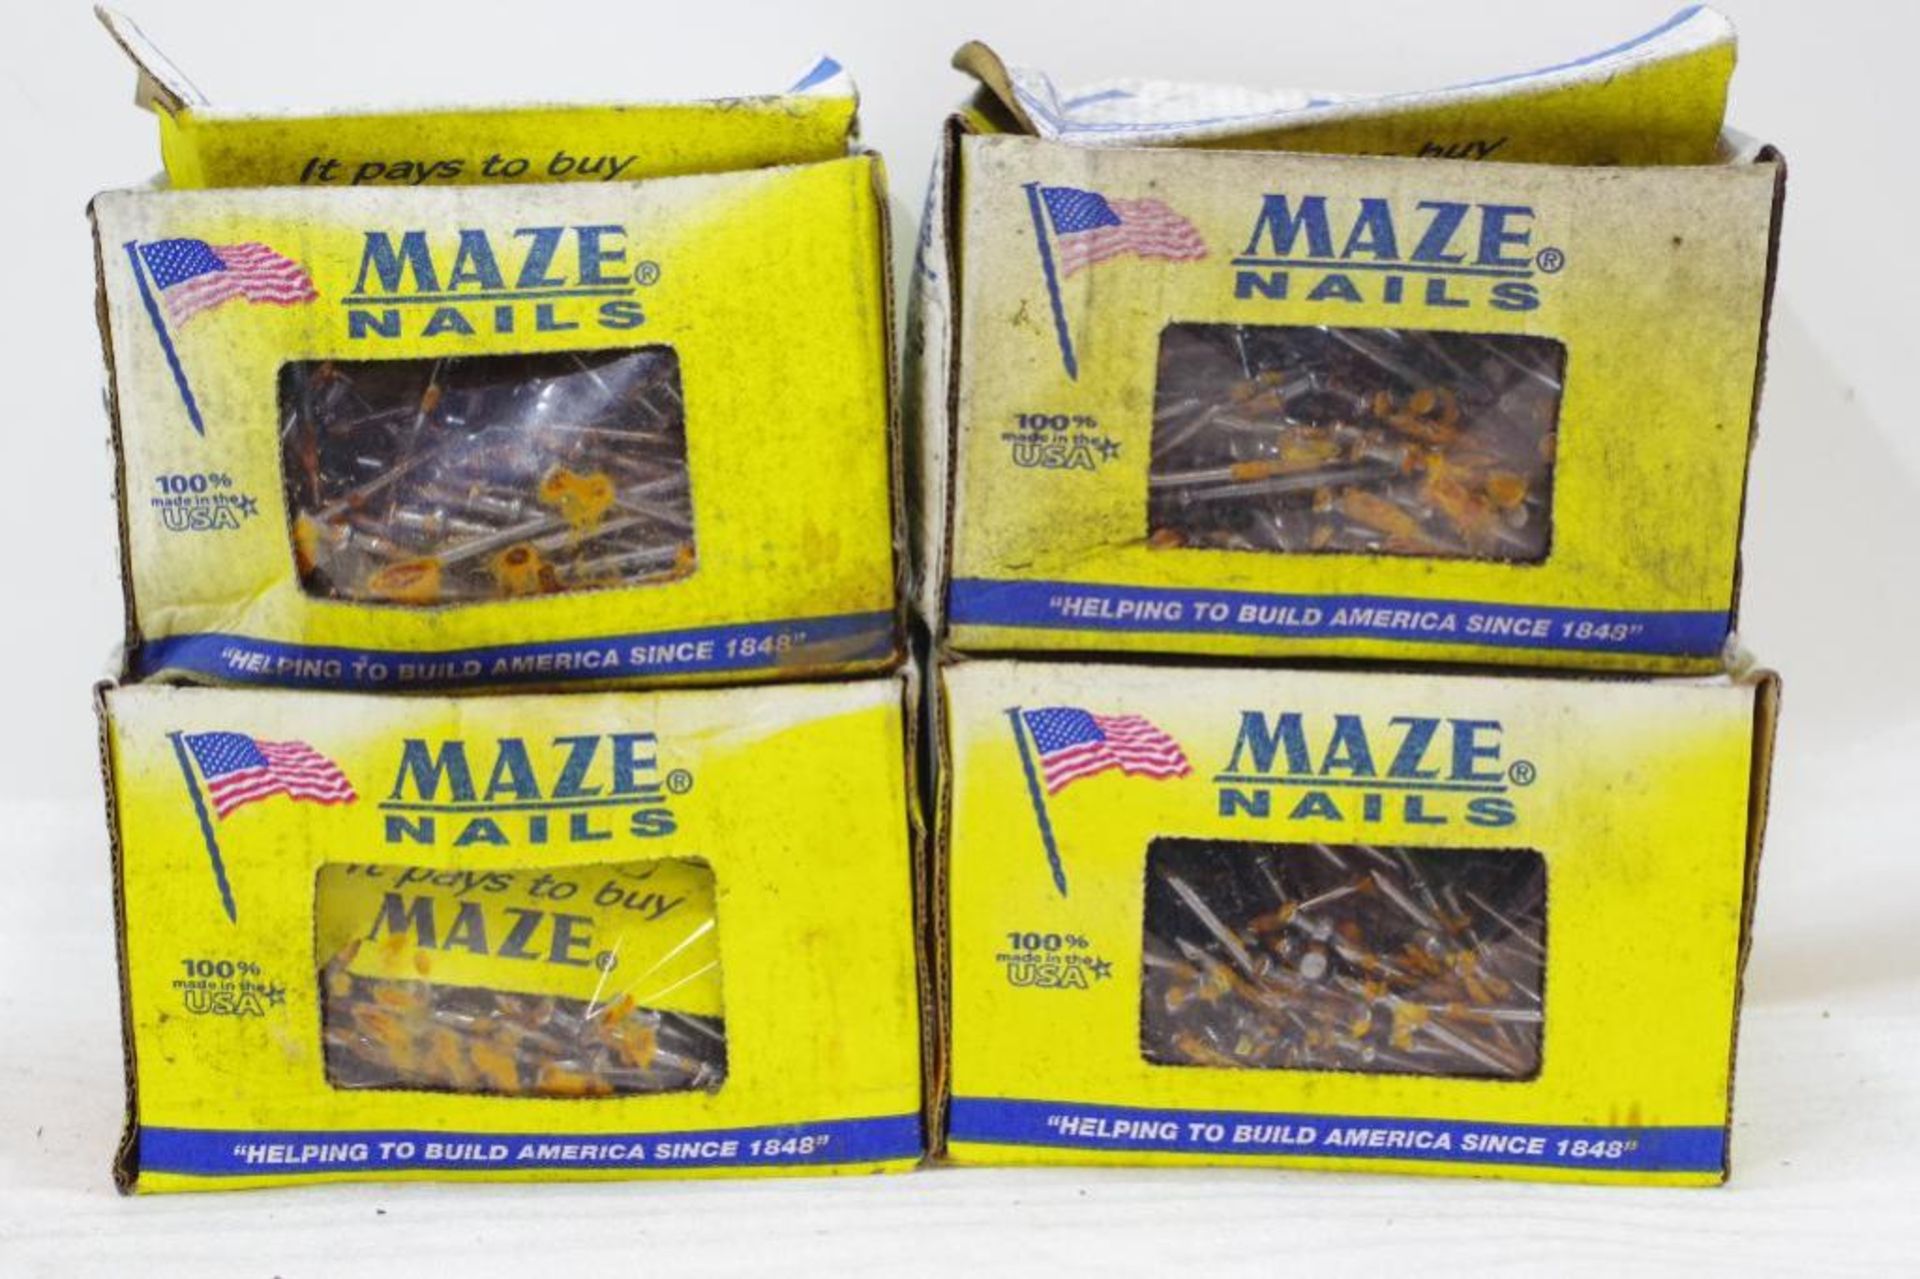 (20) Lbs. MAZE Bright Duplex Nails 2-1/2" 8d M/N DUP-8, Made in USA (4 Boxes of 5 Lbs. Each) - Image 4 of 4